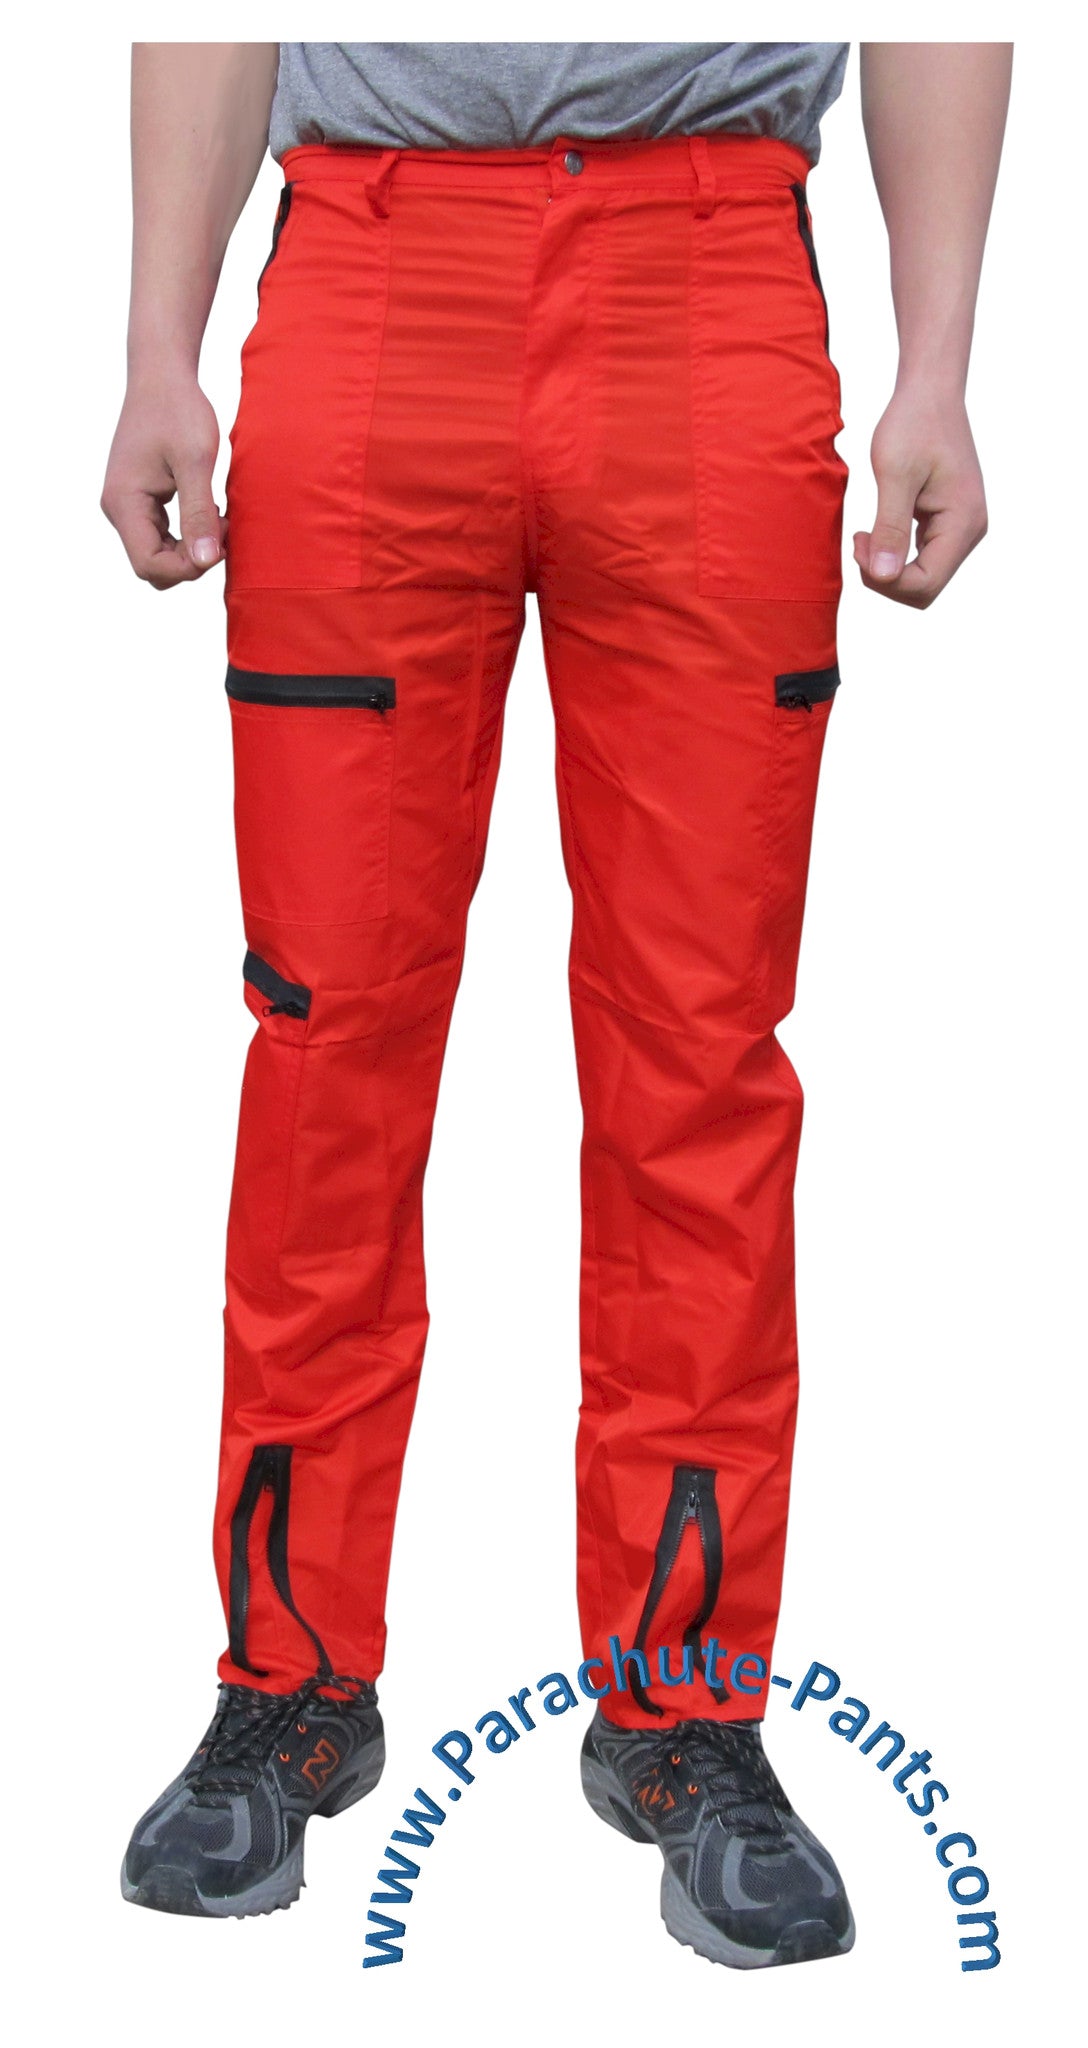 Countdown Red Classic Parachute Pants with Black Zippers | The Parachute Store